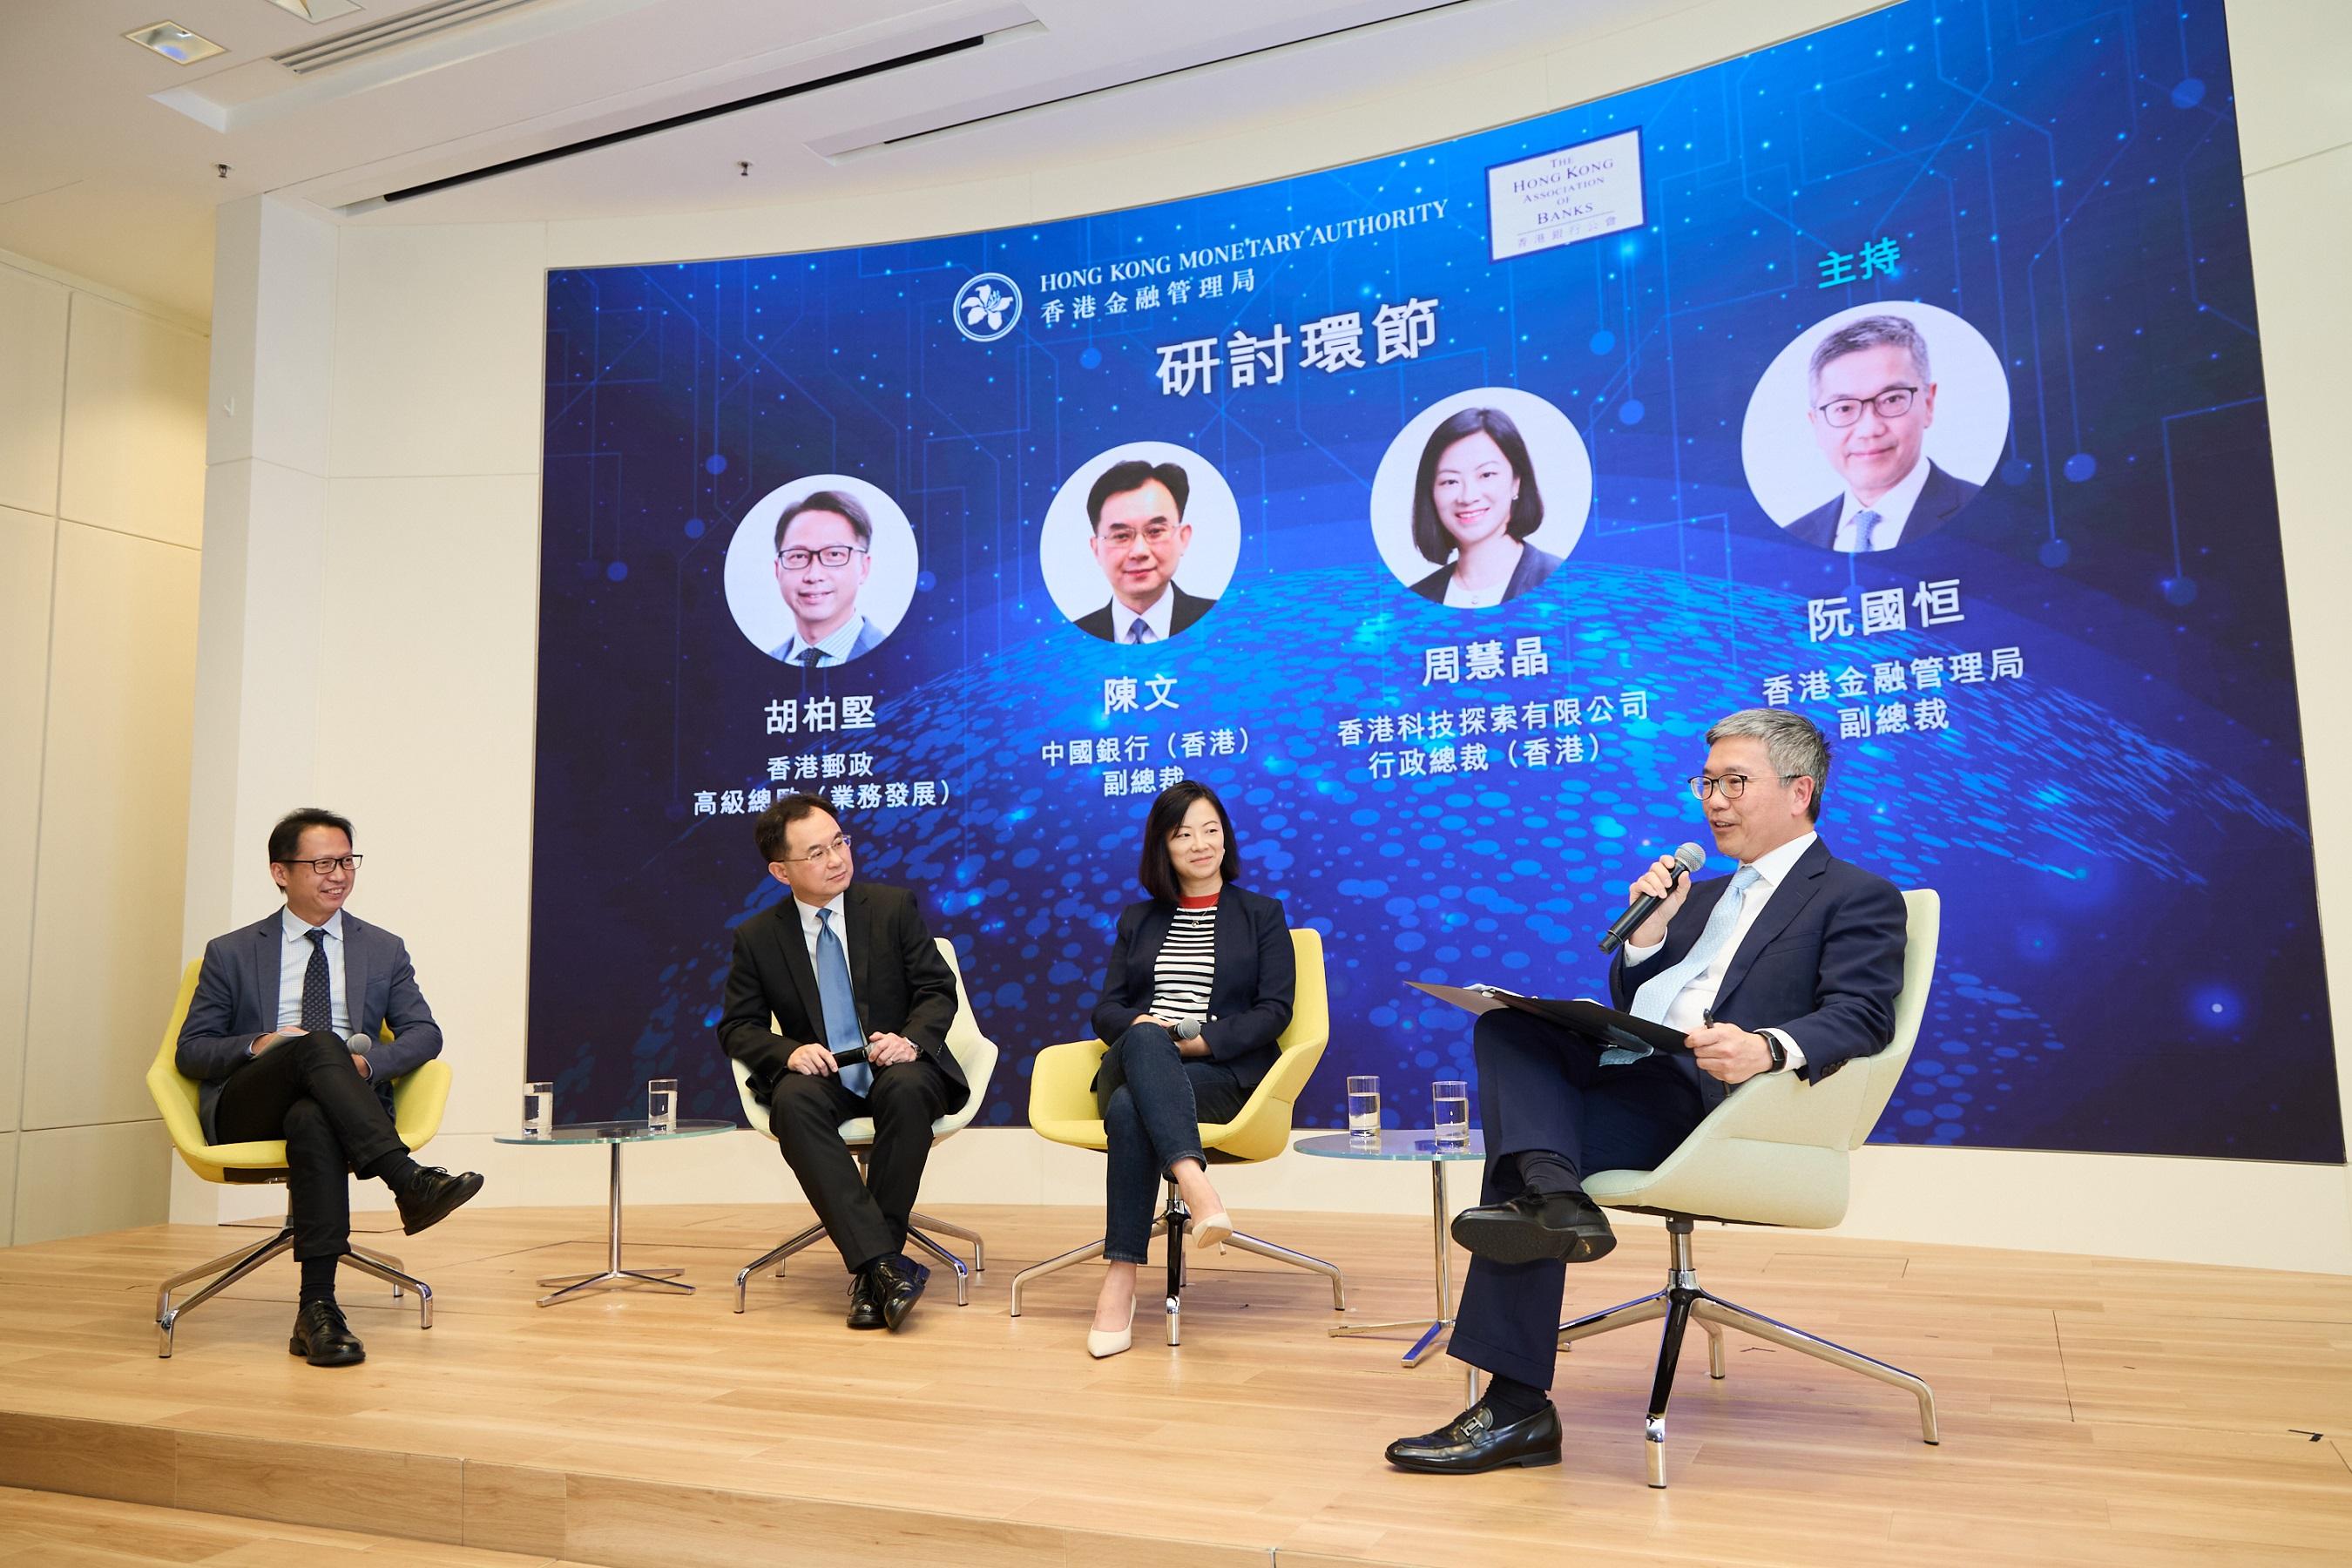 Deputy Chief Executive of the Hong Kong Monetary Authority Mr Arthur Yuen (fourth left); the Chief Executive Officer (Hong Kong) of Hong Kong Technology Venture Company Limited, Ms Jelly Zhou (third left); Deputy Chief Executive of Bank of China (Hong Kong) Mr Stephen Chan (second left); and the Senior Director of Business Development of the Hongkong Post, Mr Kenneth Wu (first left), share their experience and insight on the prevention of credit card scams at sharing session of the Anti-Scam Consumer Protection Charter event today (June 29). 